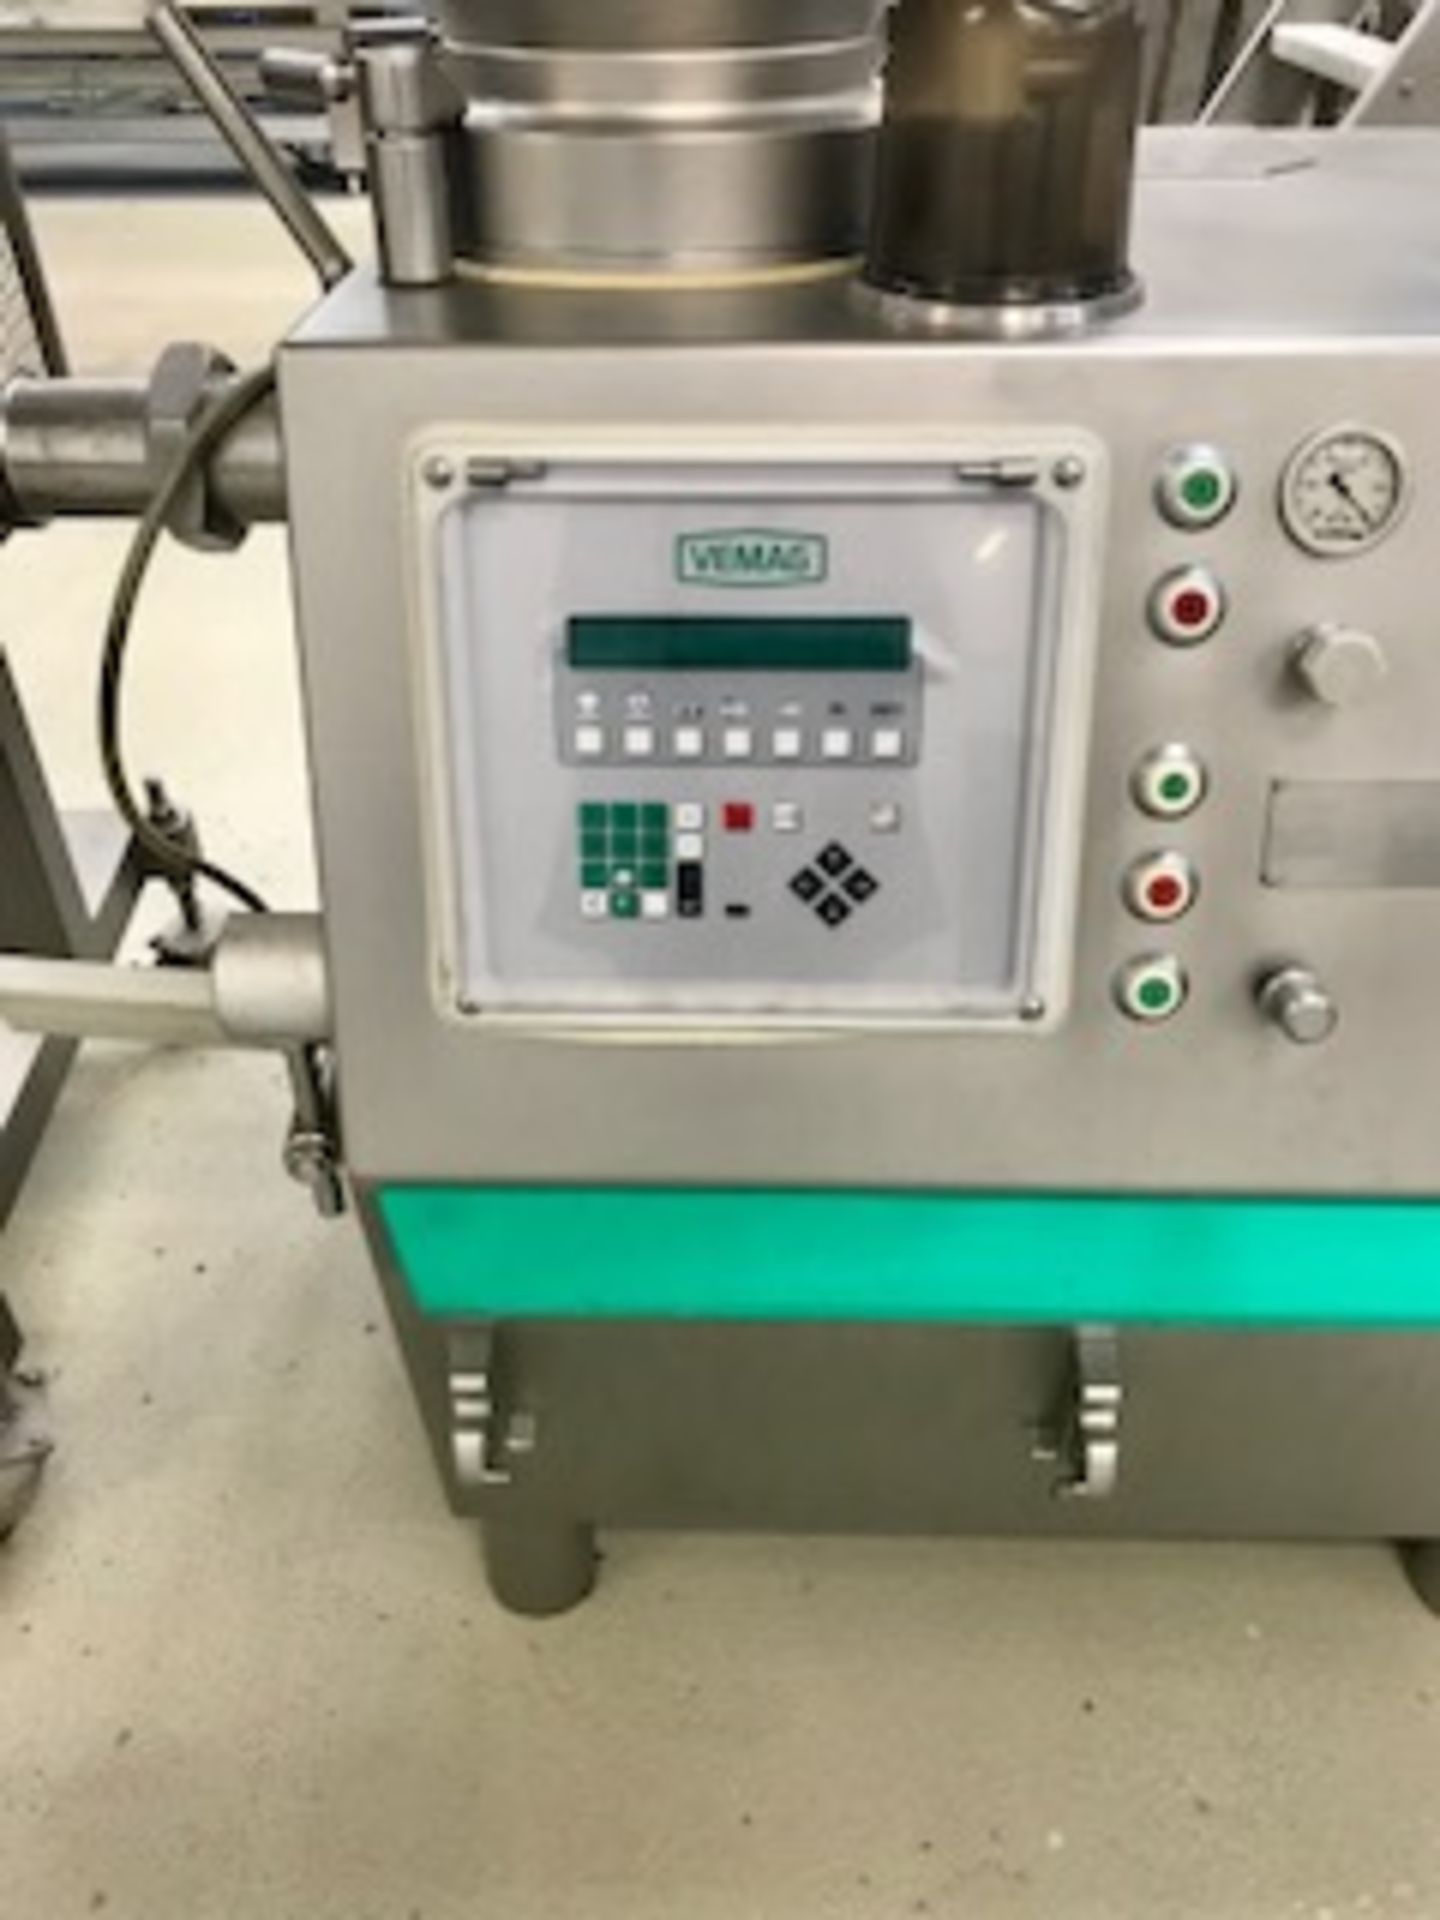 Vemag HP10C vacuum Filler for extruding dough complete guilotine and pinner Lift out charge £220 - Image 6 of 9